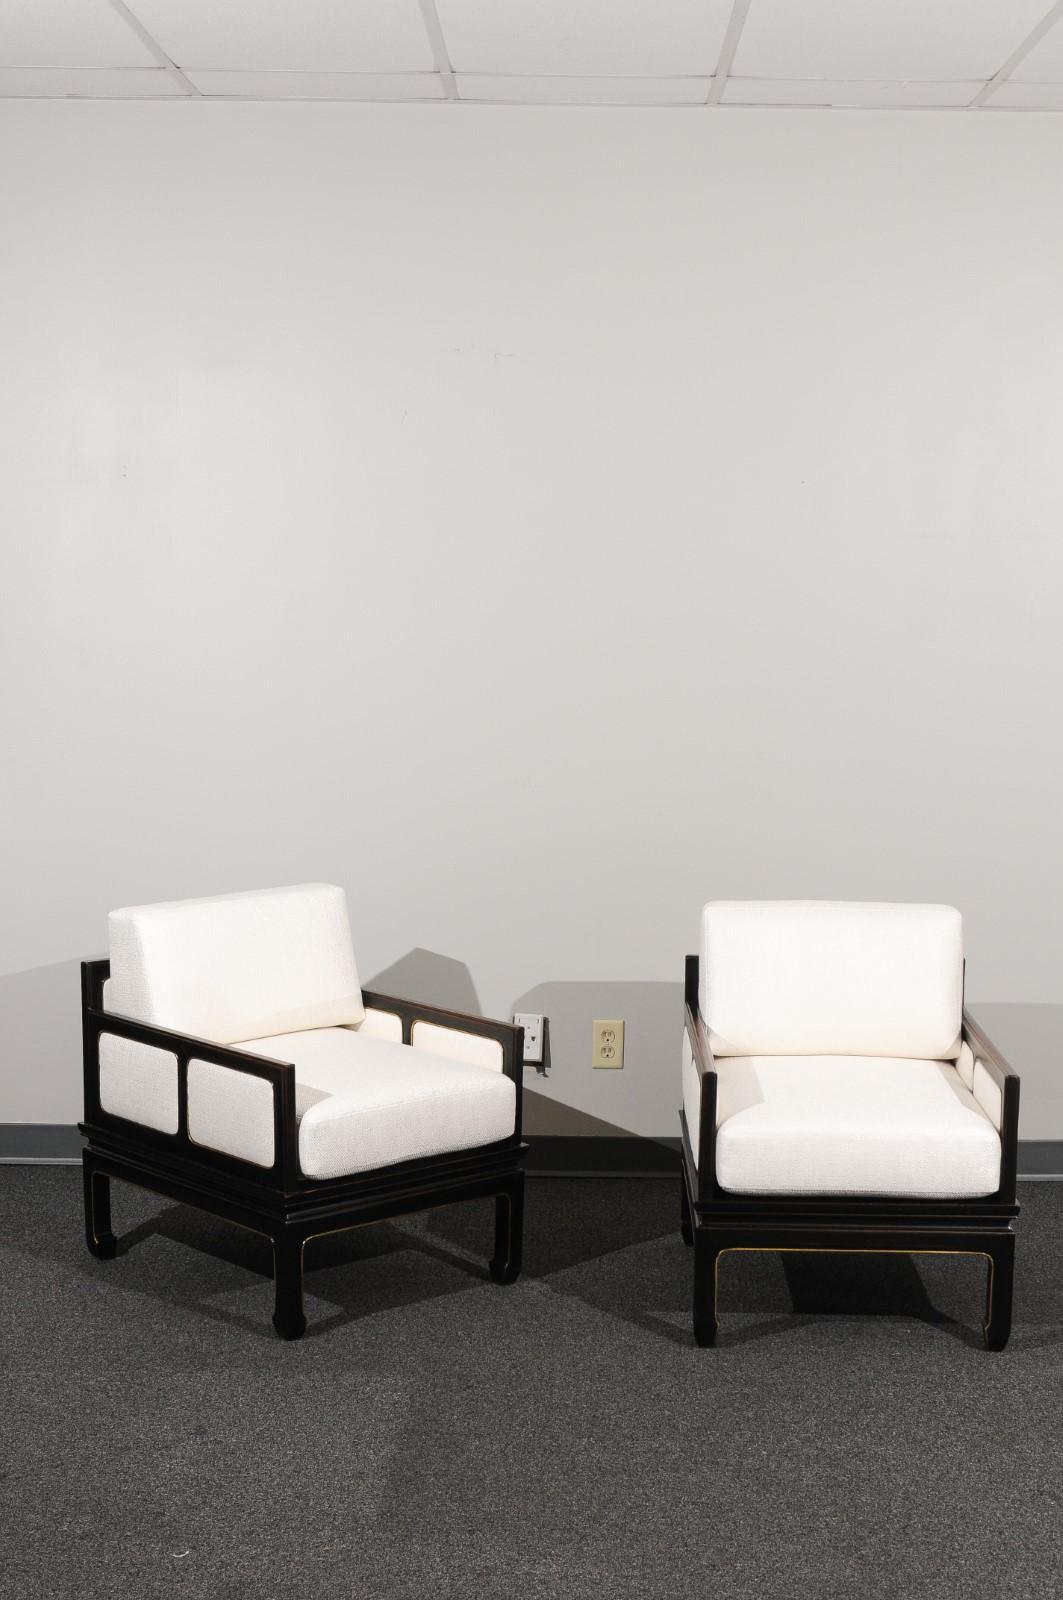 An absolutely jaw-dropping pair of meticulously restored lounge chairs from a boutique series produced by Baker Furniture, circa 1960. Extremely rare examples. Stout, expertly crafted ebonized solid mahogany construction. This elegant Asian